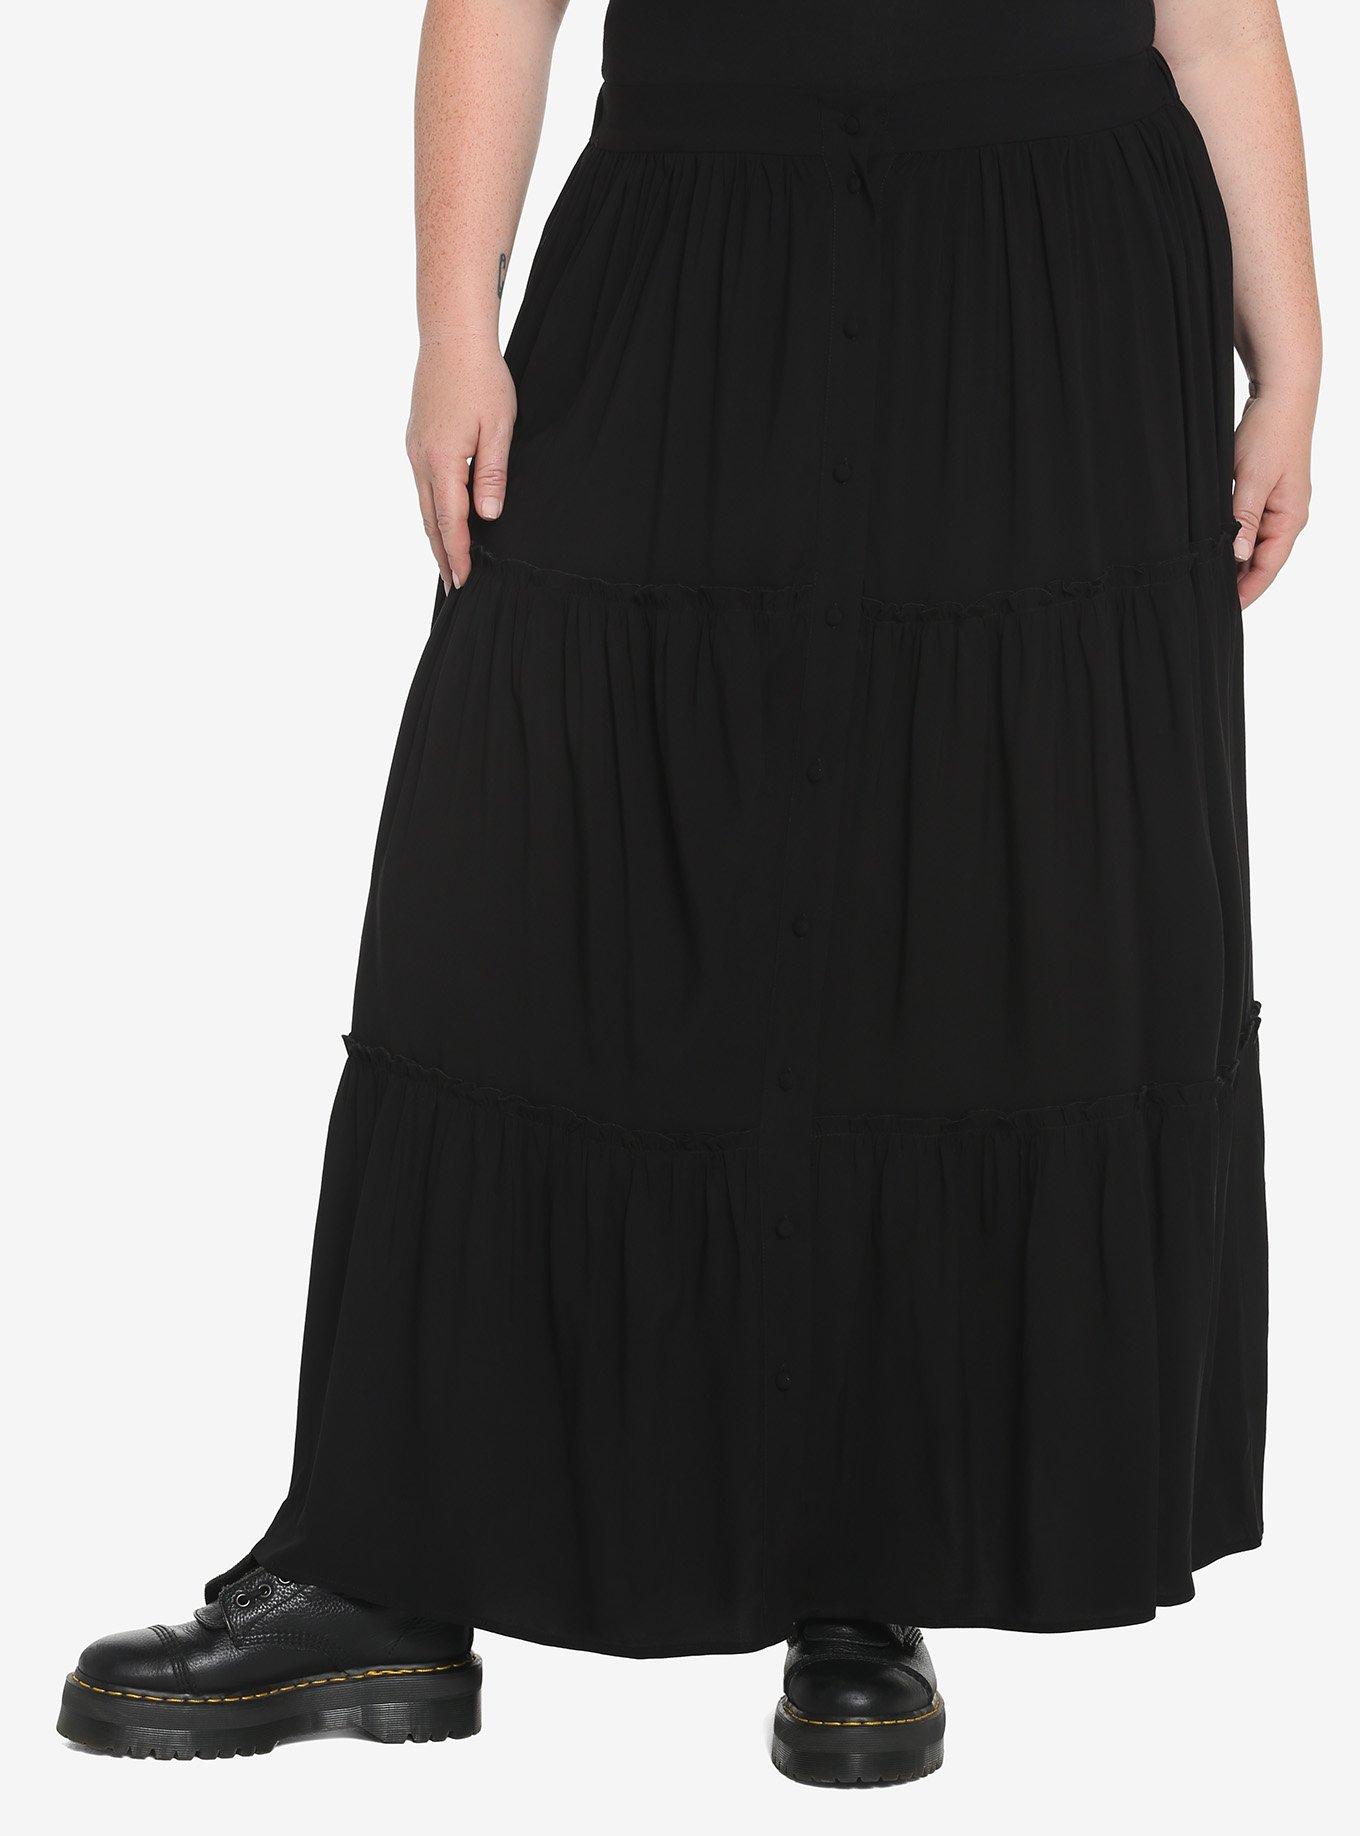 Black Tiered Button-Down Maxi Skirt Plus Size | Hot Topic